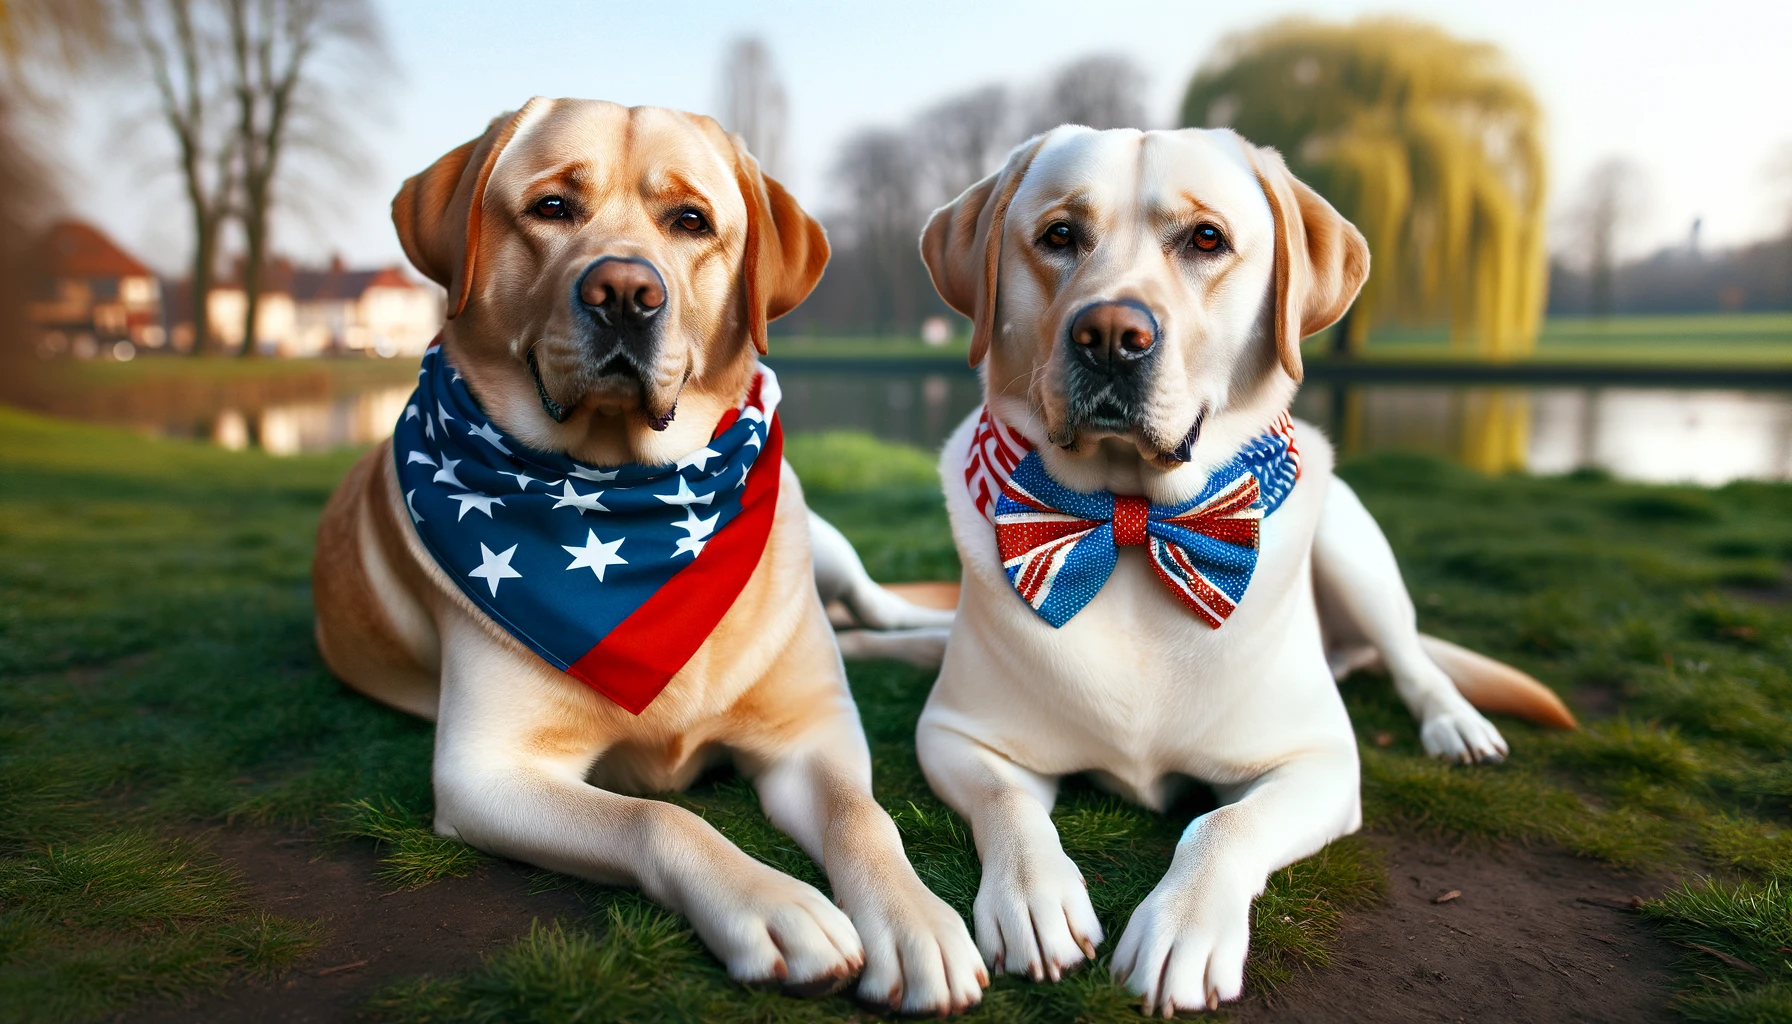 Two Green Labs chilling side by side—one with an American flag bandana, the other sporting a British bow tie.